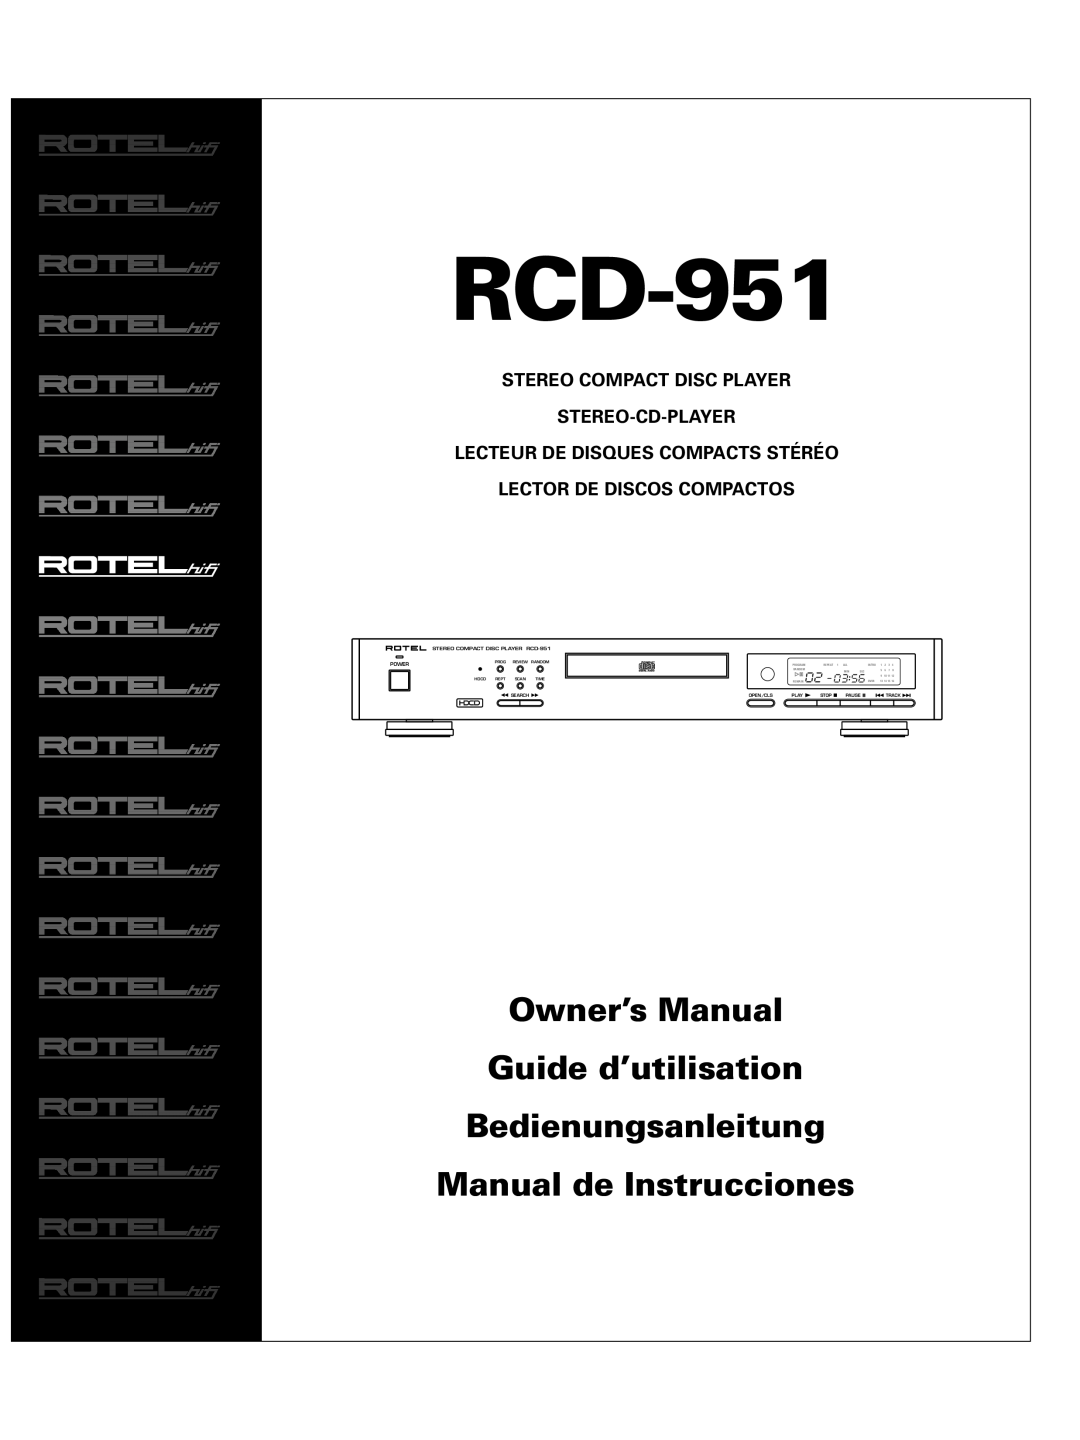 Rotel RCD-951 owner manual Guide d’utilisation, Bedienungsanleitung, Manual de Instrucciones, Stereo Compact Disc Player 